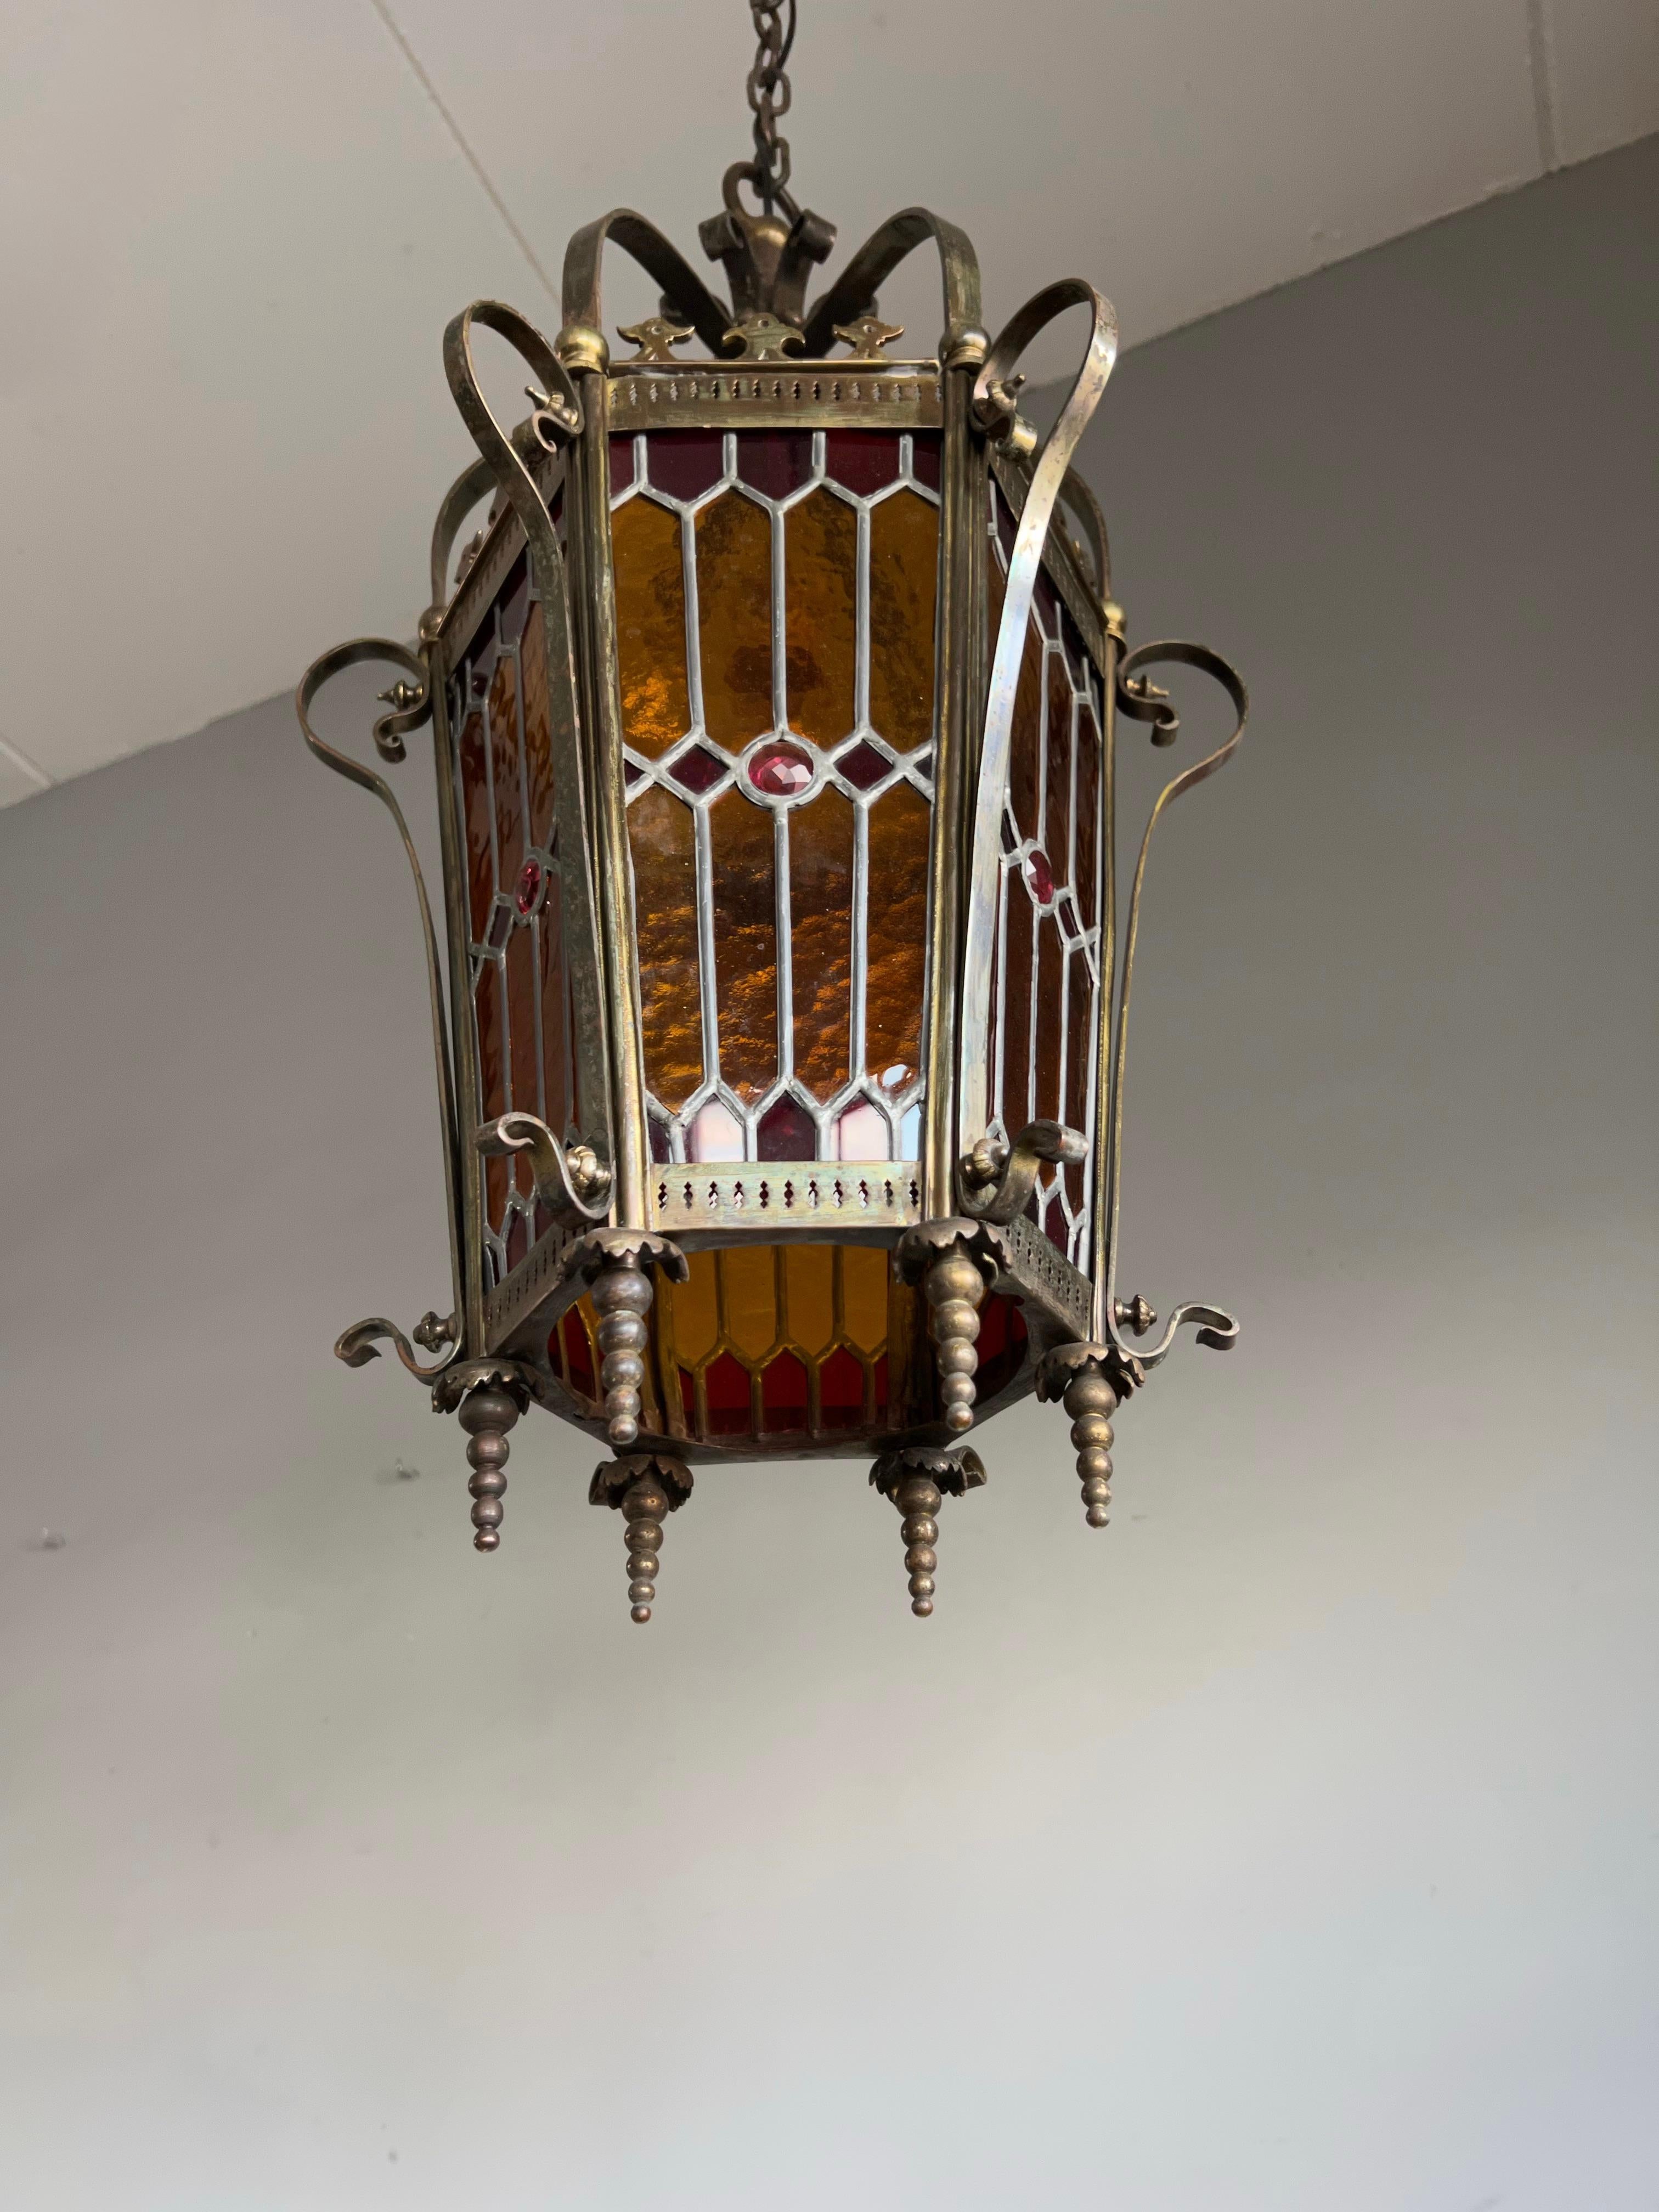 Wonderful Late Victorian Bronze and Stain Leaded Glass Pendant Light / Lantern For Sale 3